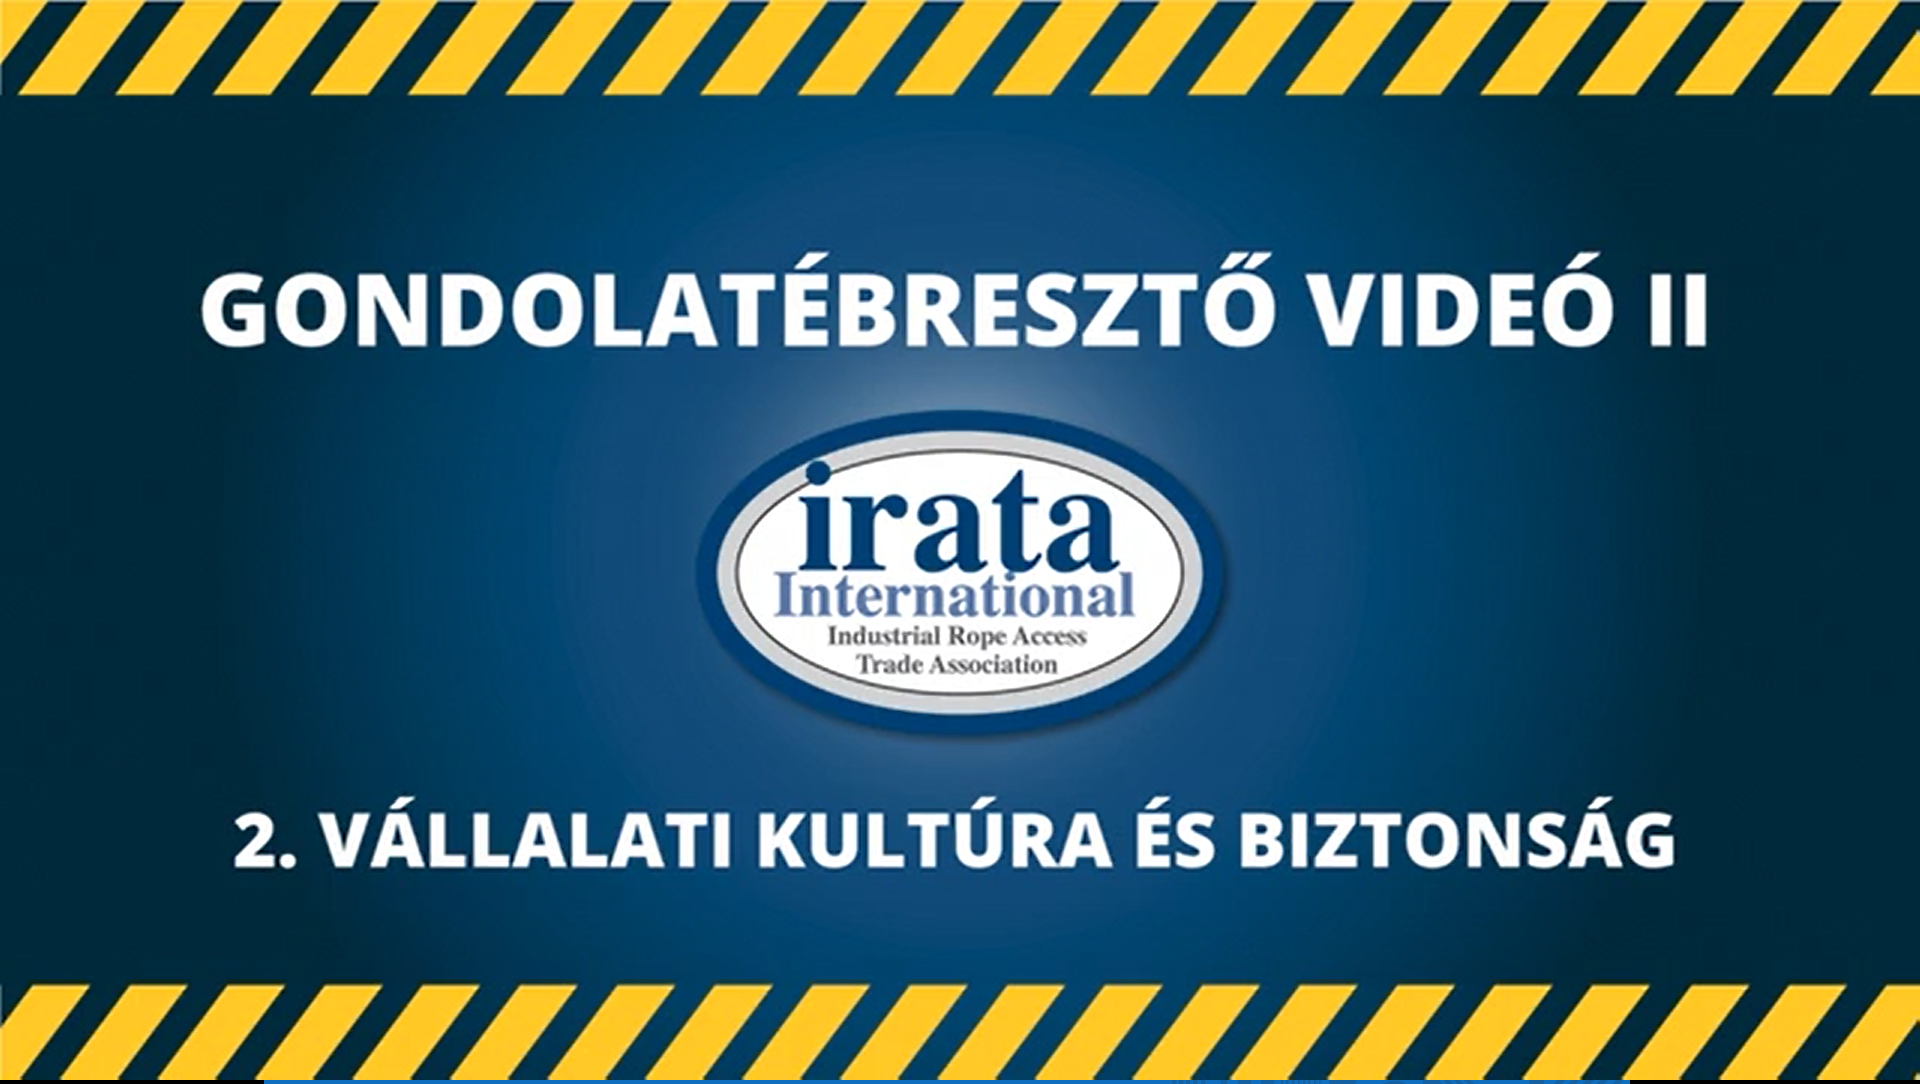 SAFETY AWARENESS VIDEO - management and safety culture - Hungarian SUBTITLES